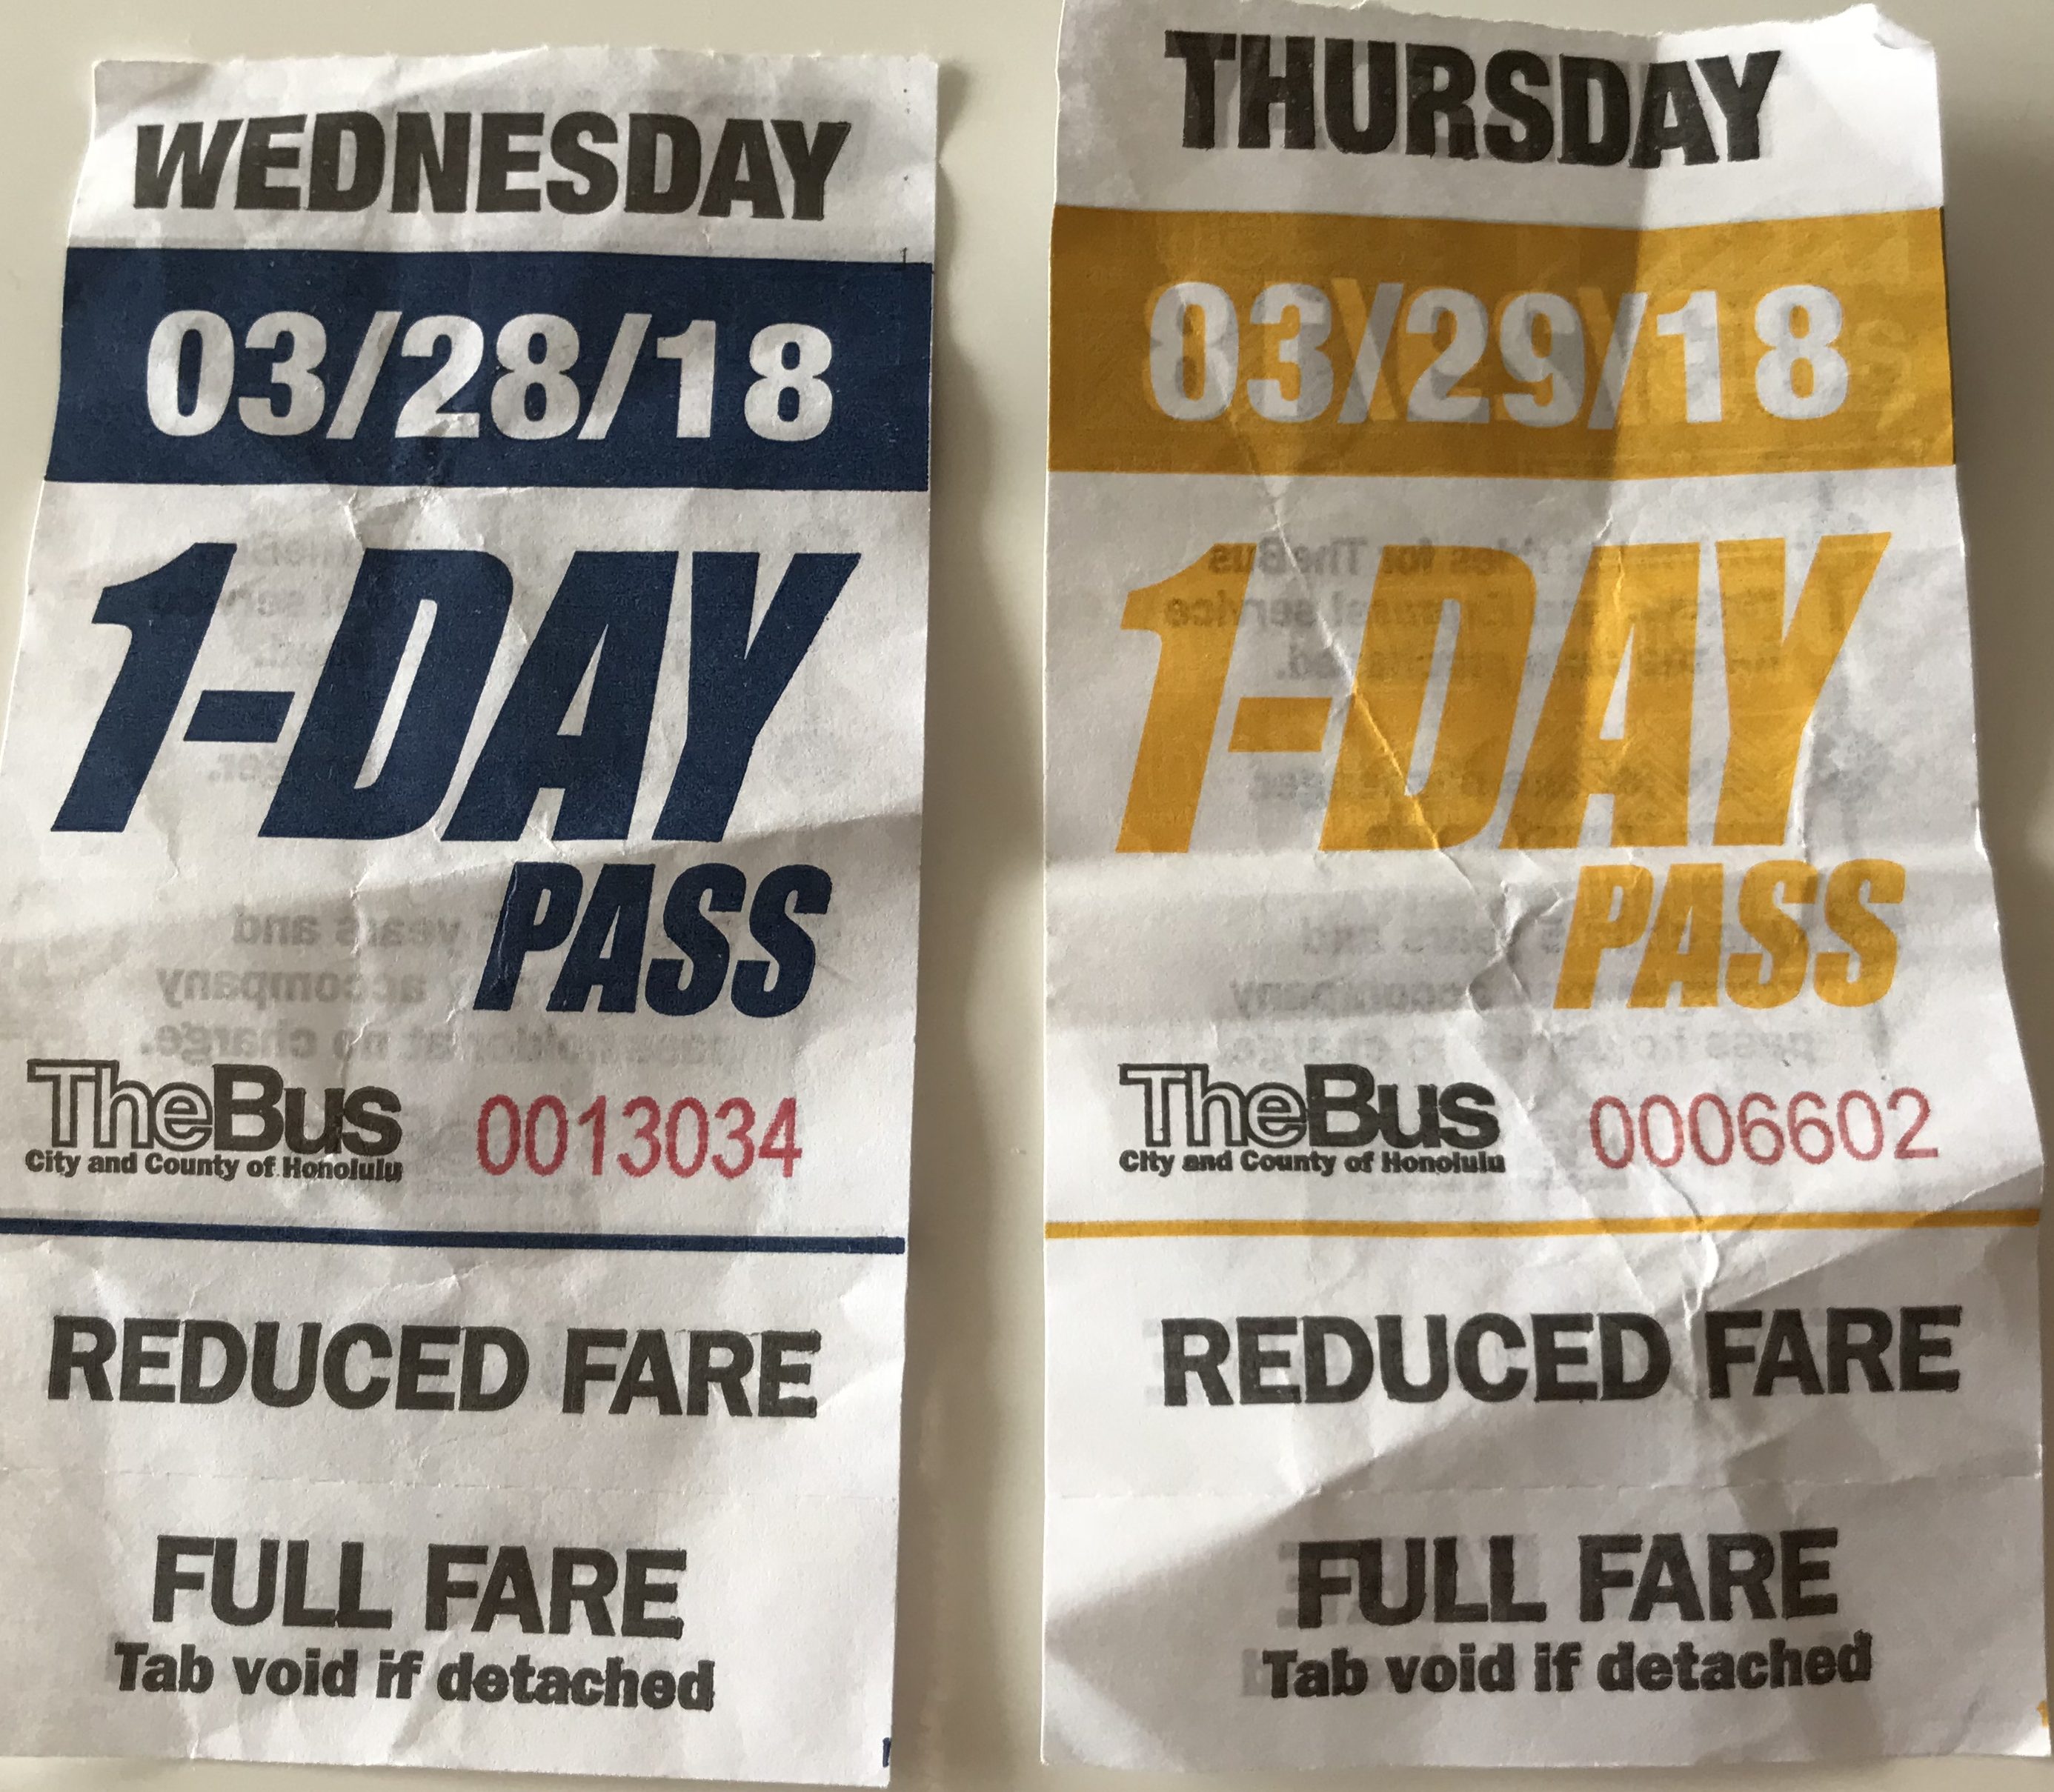 One day pass